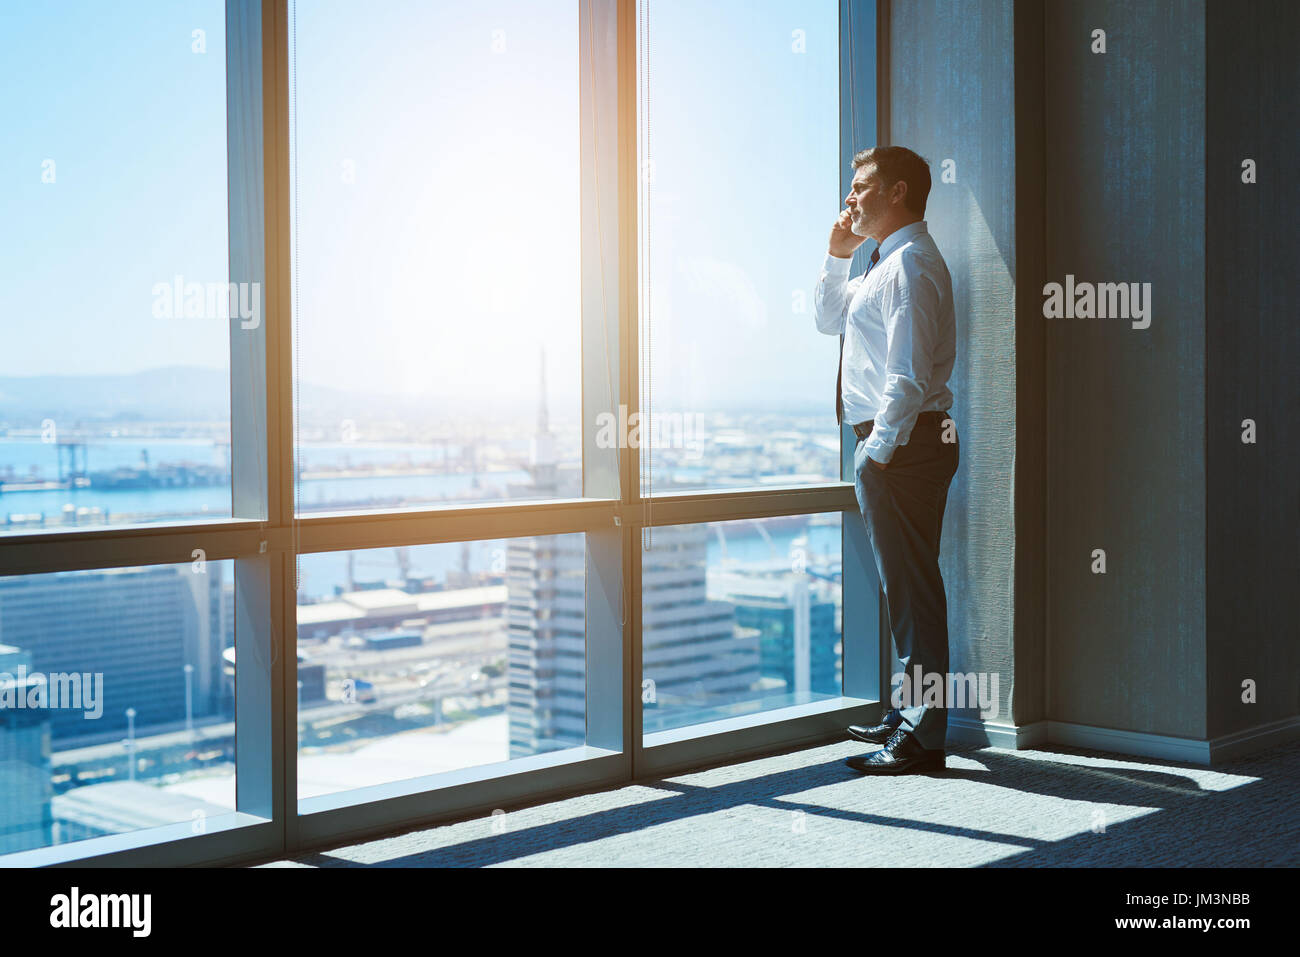 Mature and cnofident business executive looking looking out of large windows at a view of the city below, from the top floor of an office building, wh Stock Photo